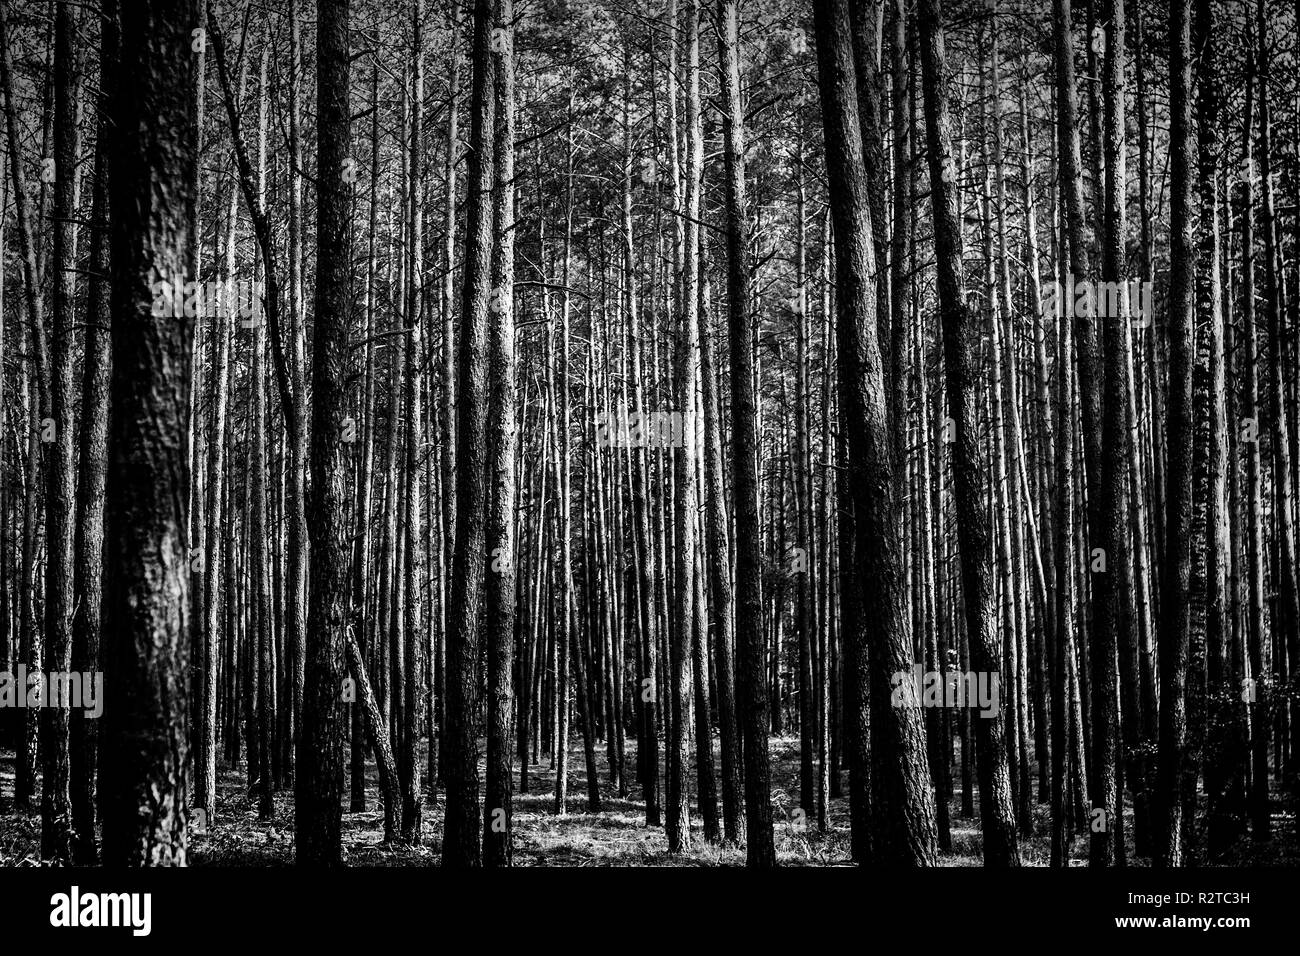 Monochrome picture of gloomy young pine forest Stock Photo